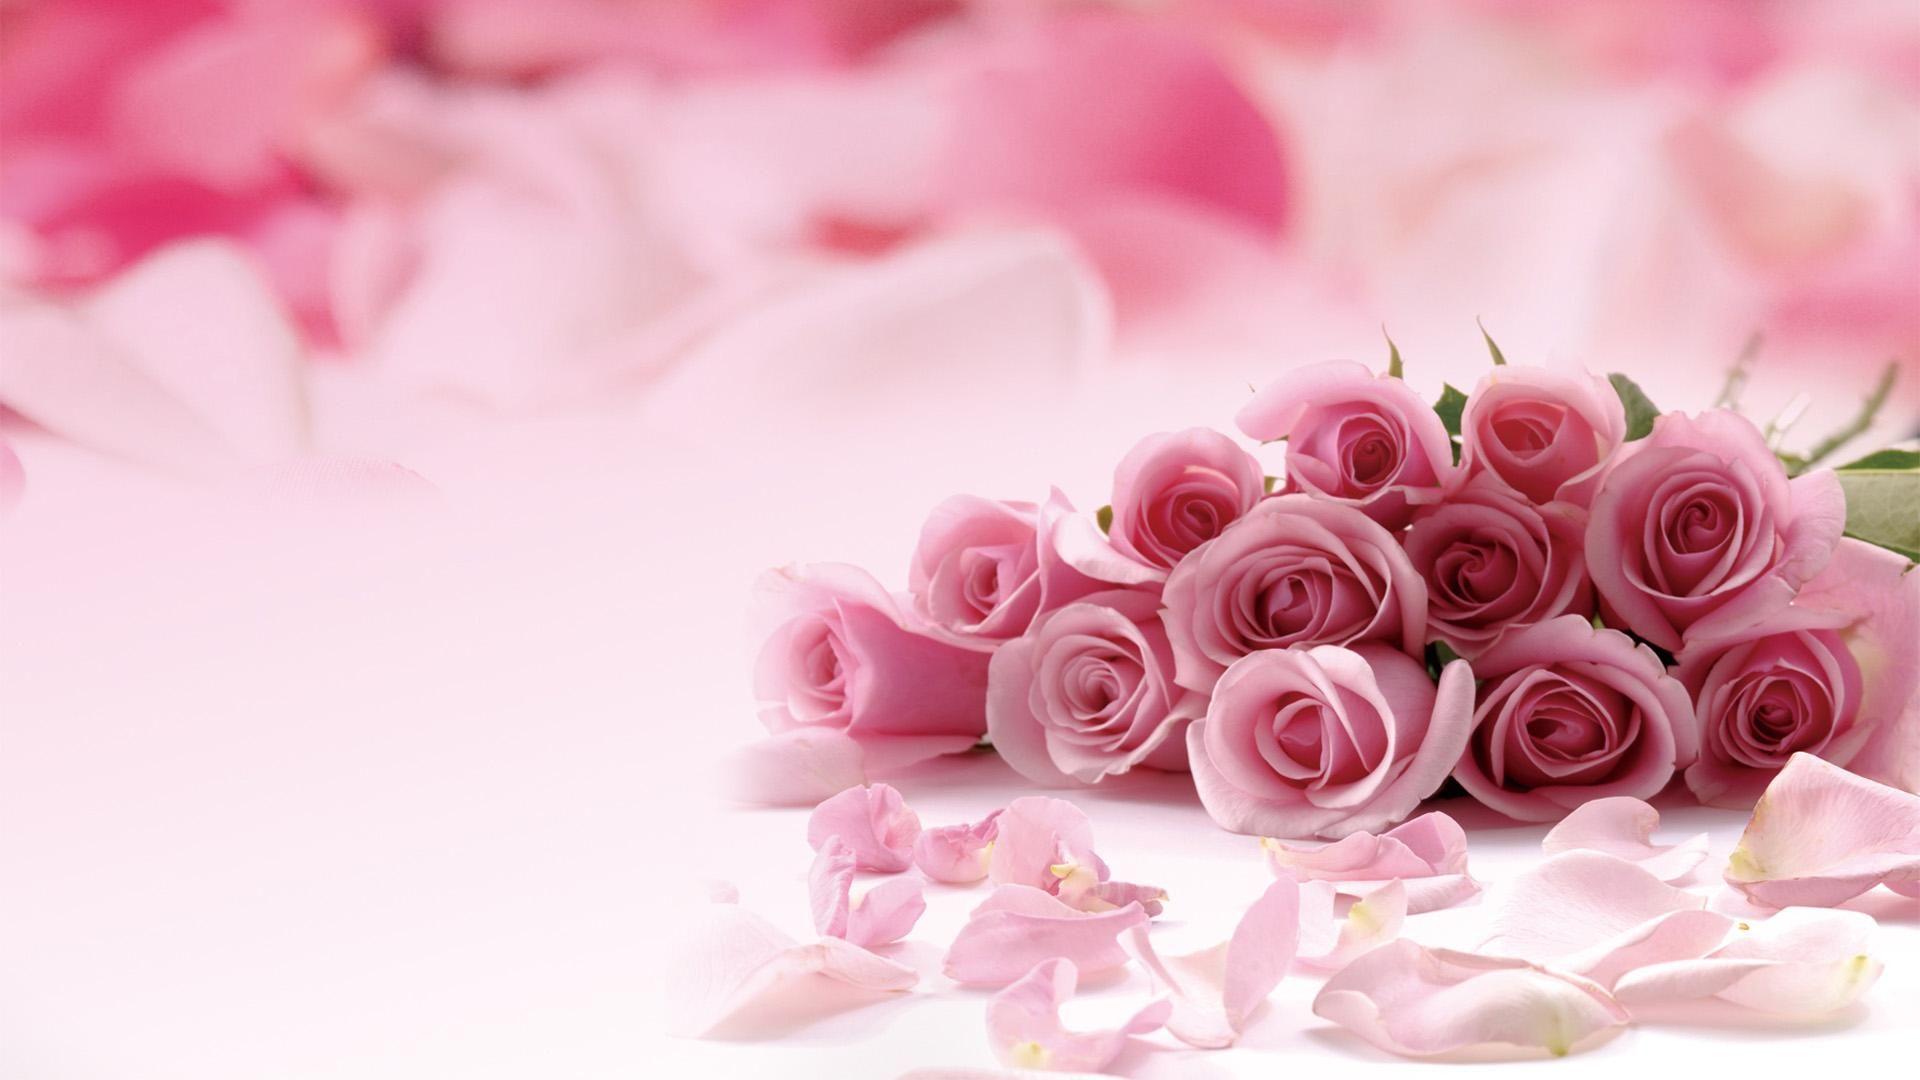 Awesome Pink Rose HD Wallpaper For Desktop High Quality Widescreen